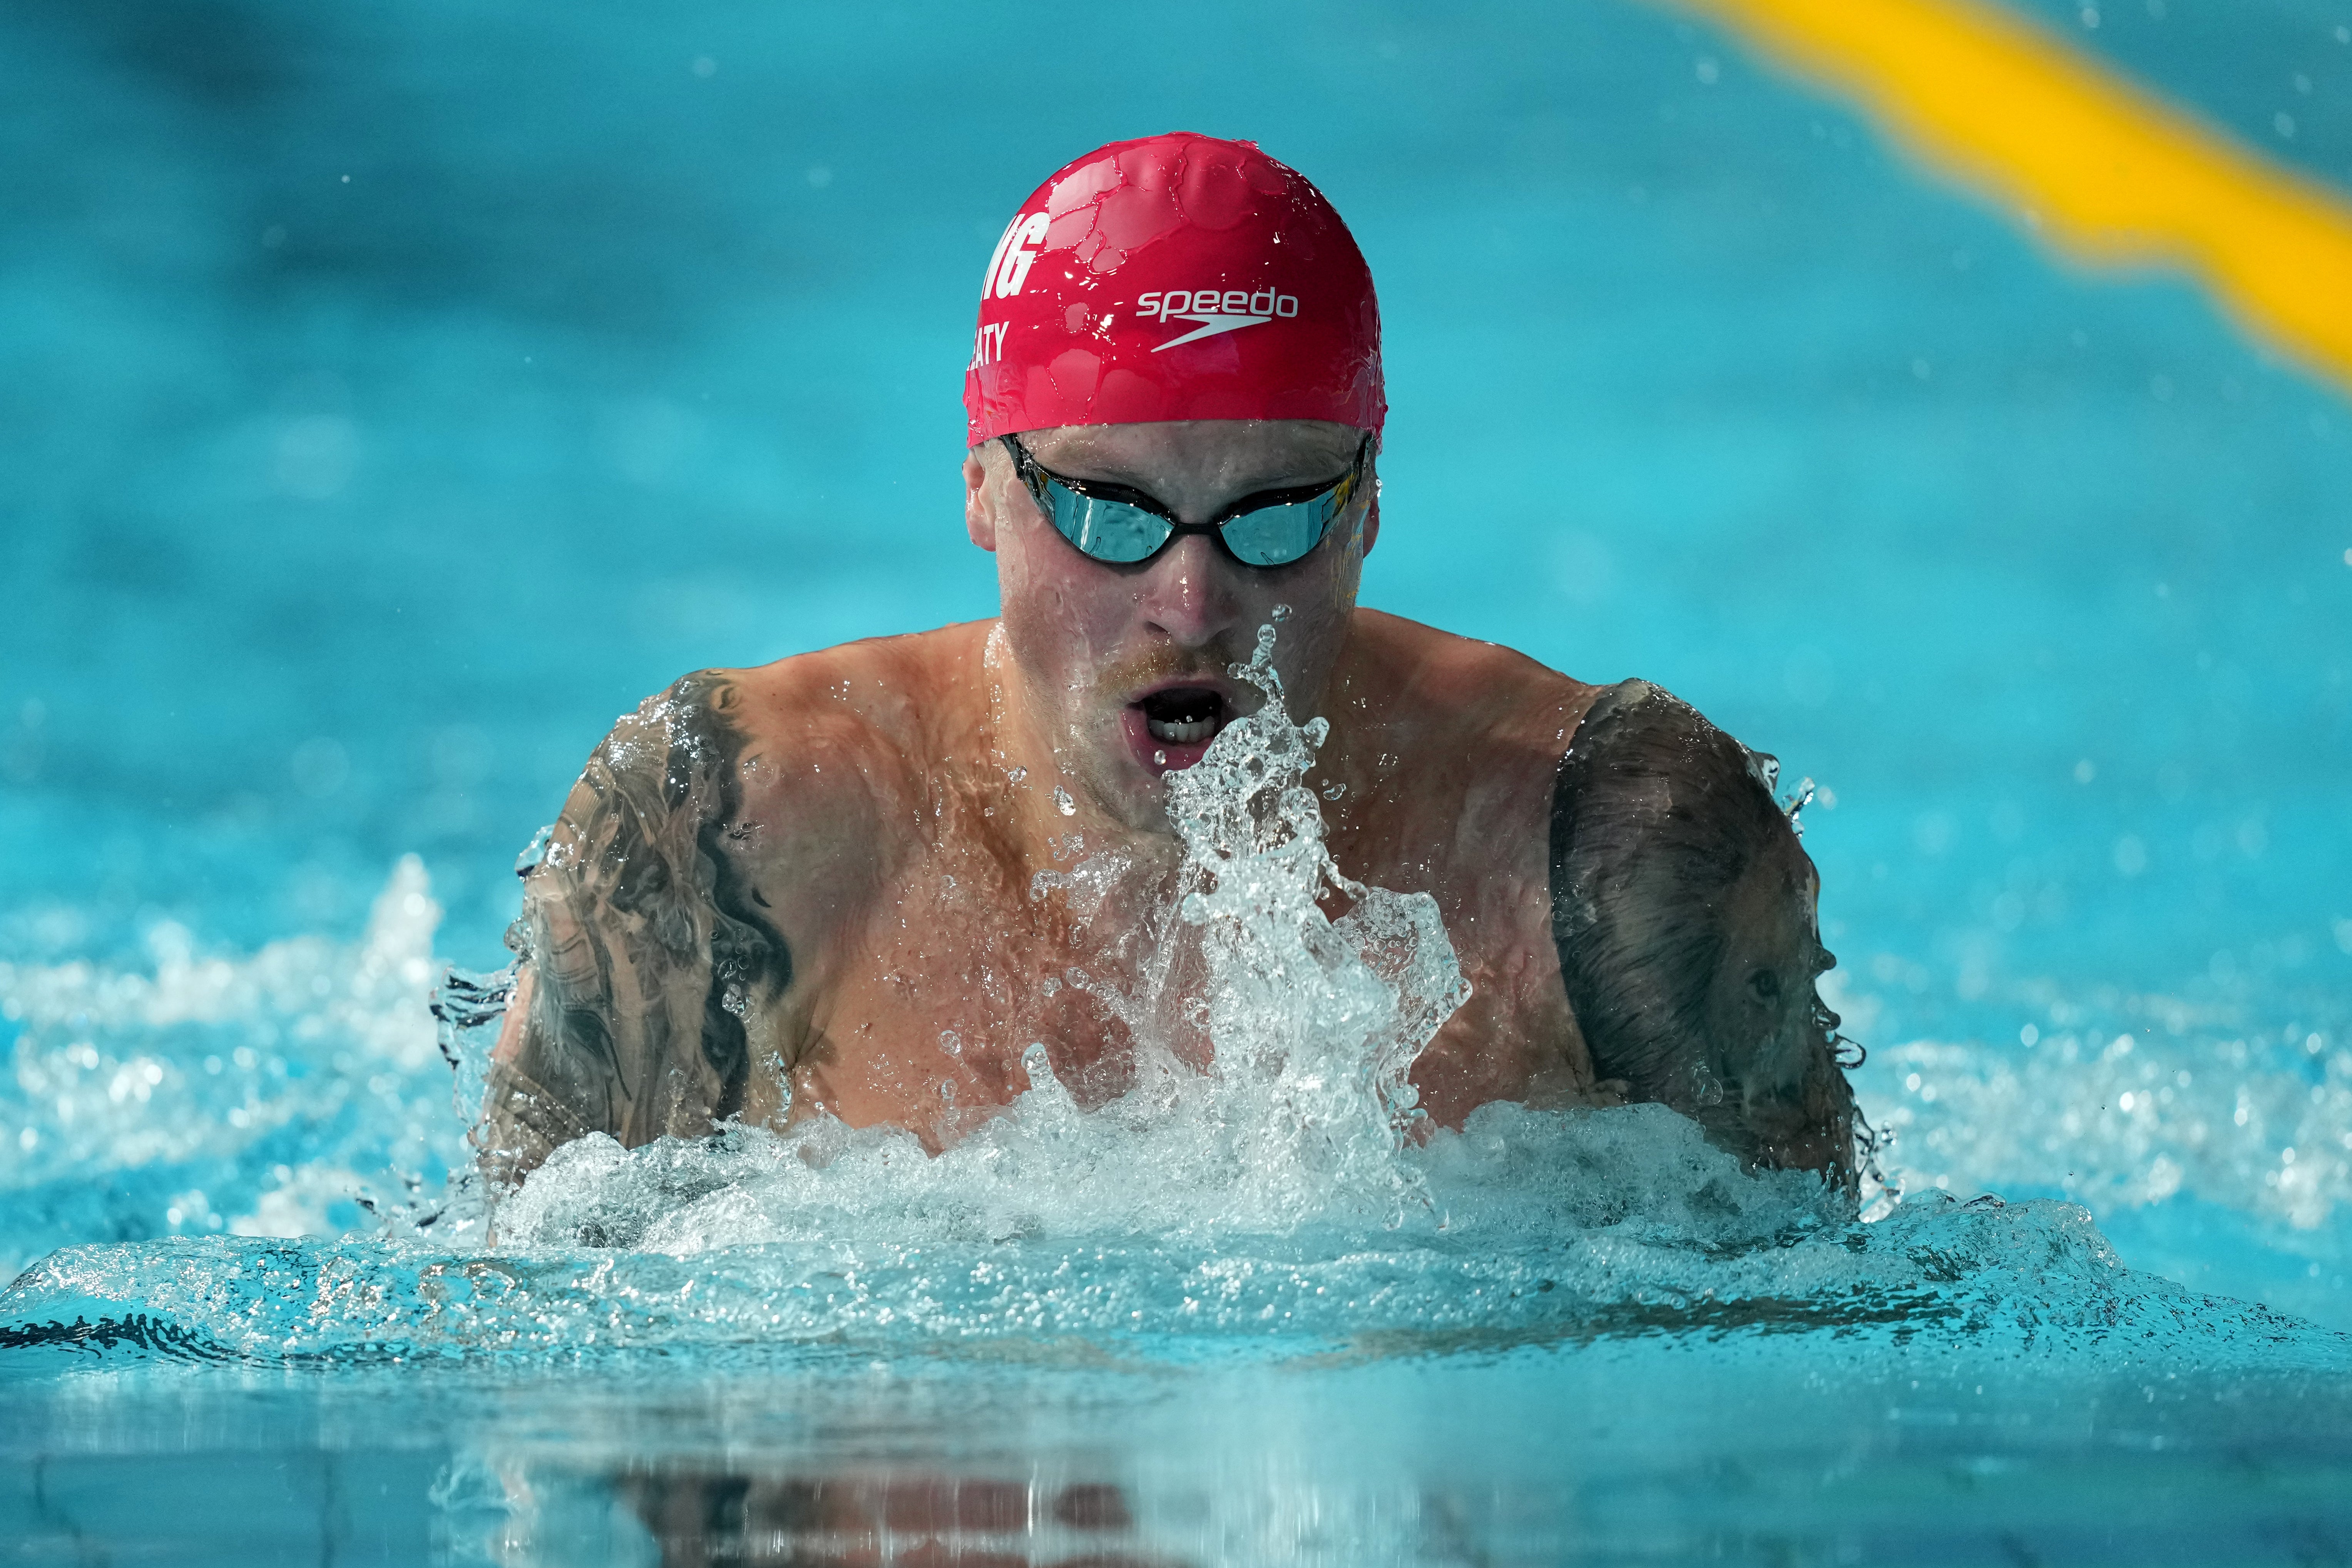 Adam Peaty on his way to a shock defeat in the 100m breaststroke final at Sandwell Aquatics Centre (Tim Goode/PA)